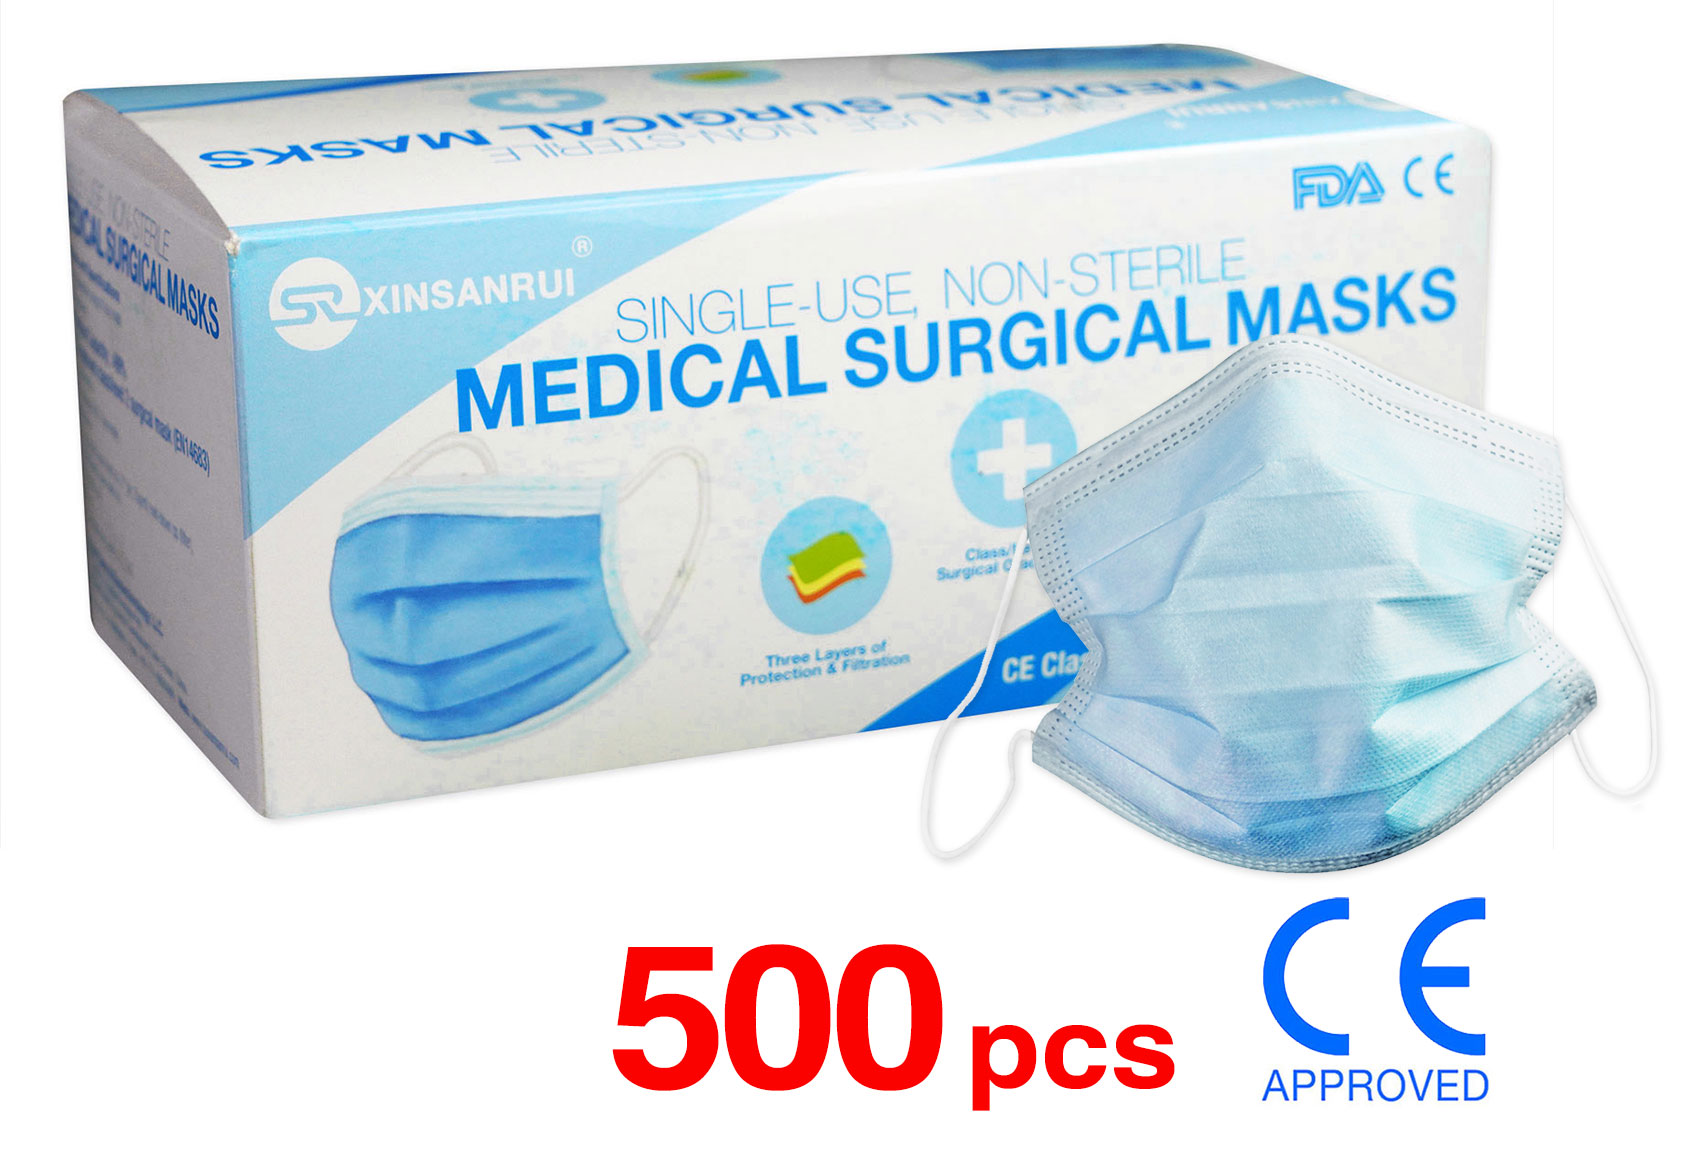 are face masks deductible medical expenses